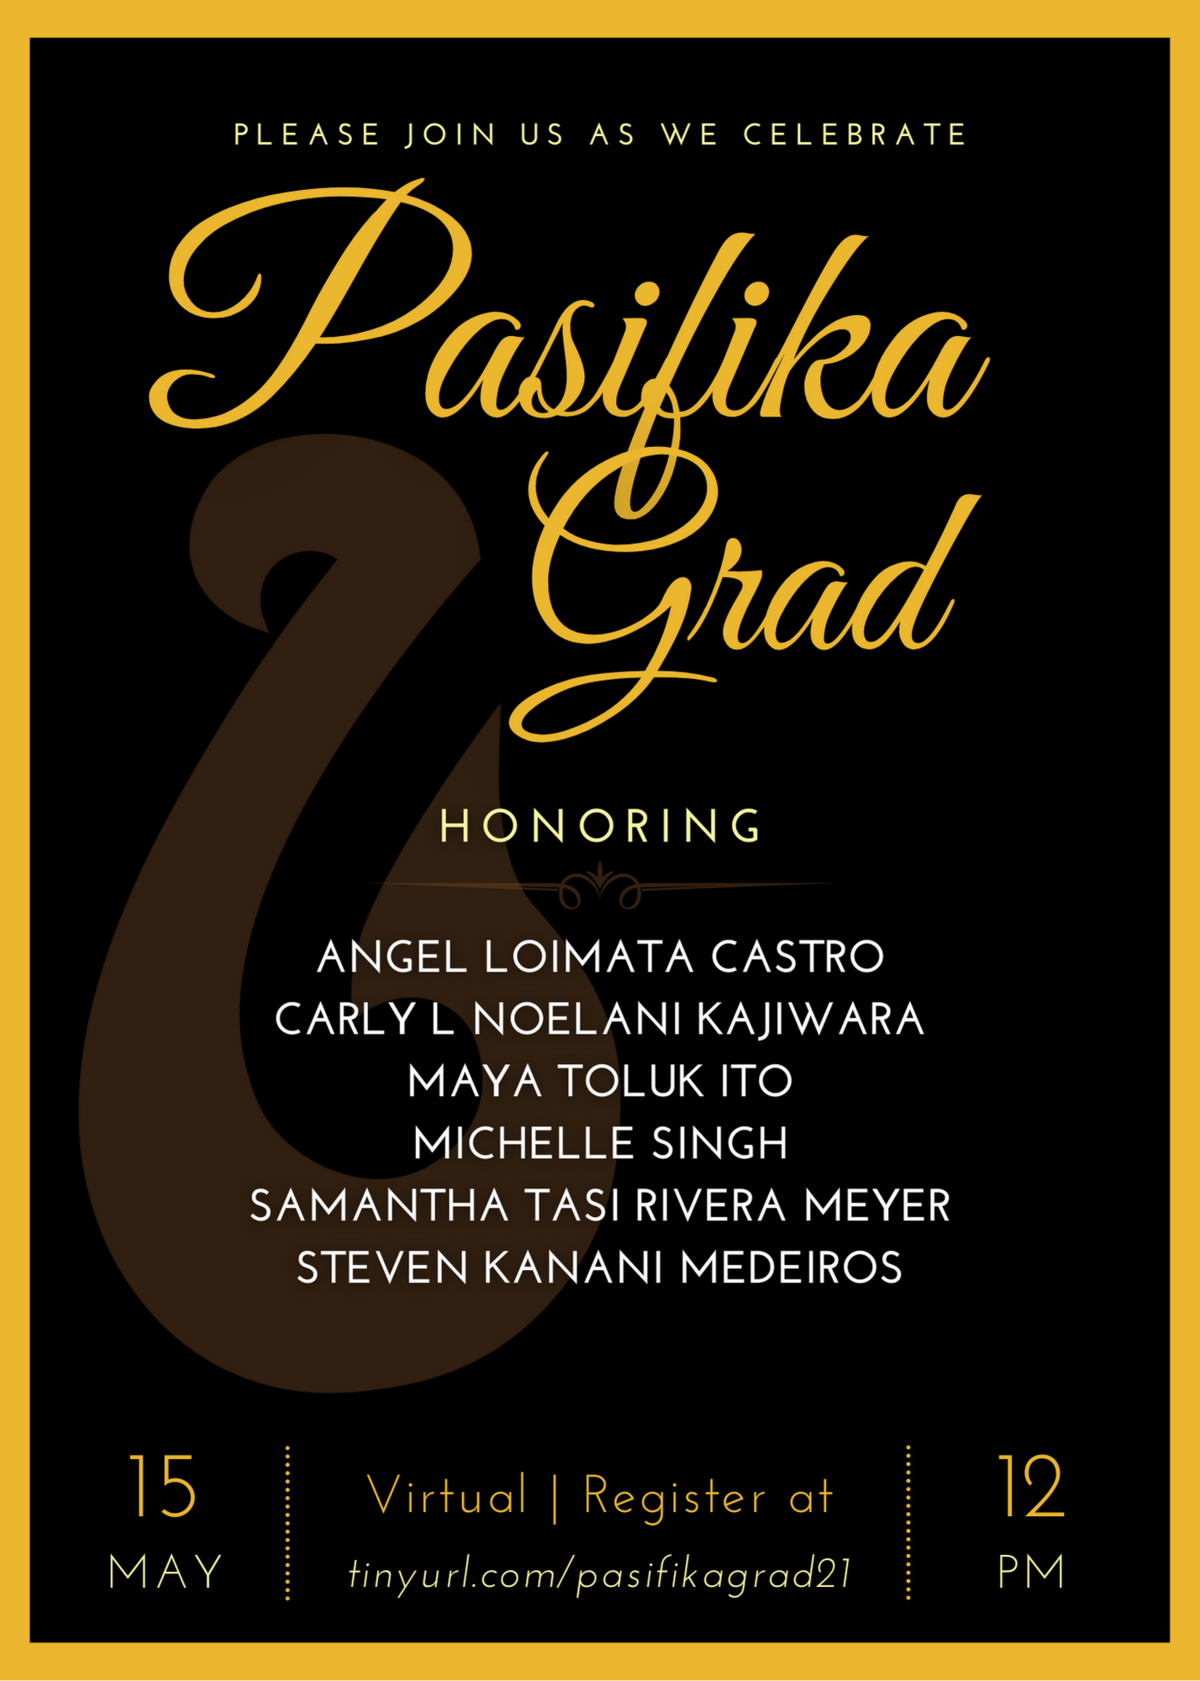 Black, gold framed invitation with the PI Initiative fish hook logo in the background inviting folks to RSVP for Pasifika Grad.